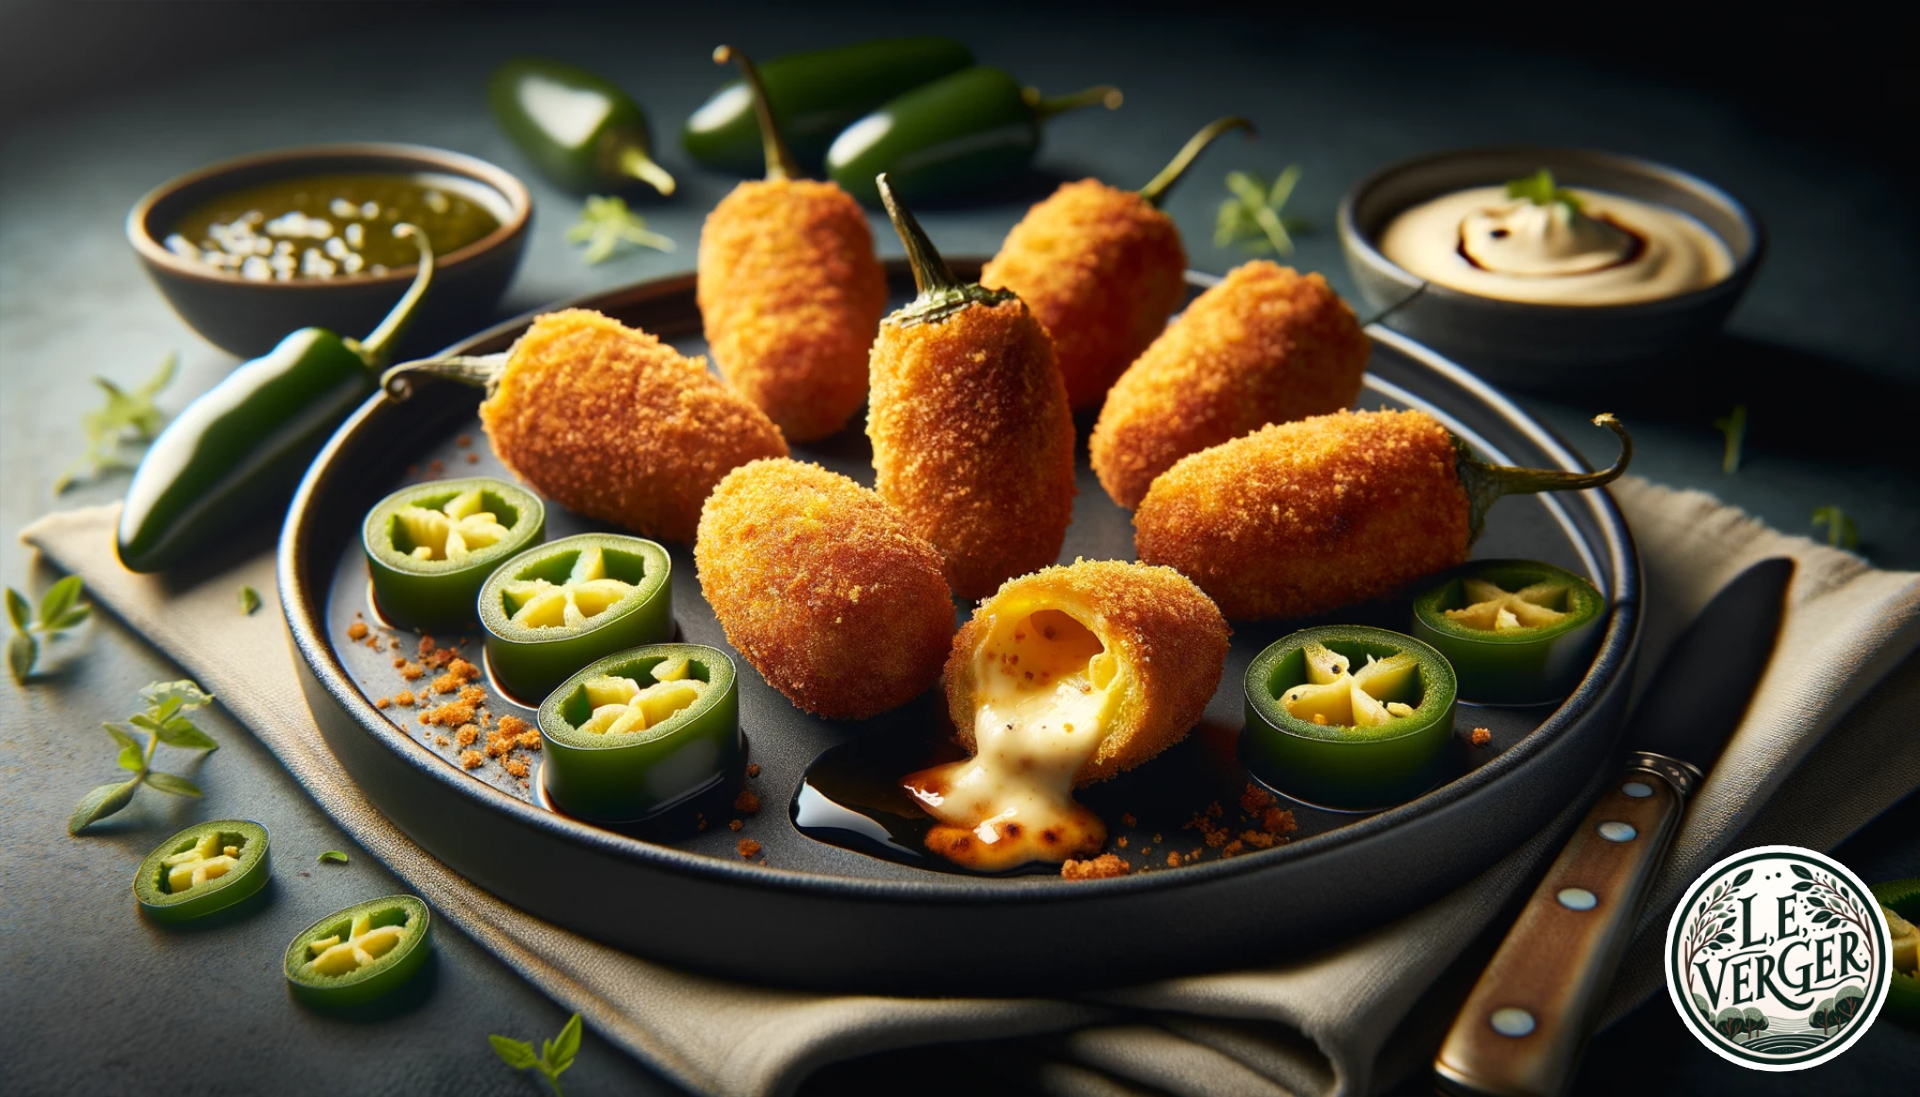 Photo of Jalapeño Poppers styled luxuriously, in line with British culinary marketing. Laid out on a sleek black plate, the poppers have a rich golden-brown crispy breadcrumb exterior. The cut-open popper at the front reveals the creamy cheese filling inside the spicy jalapeño. Soft ambient lighting highlights the textures, and a small bowl of cooling dip is placed next to the poppers, with a sprinkle of fresh herbs around the plate.